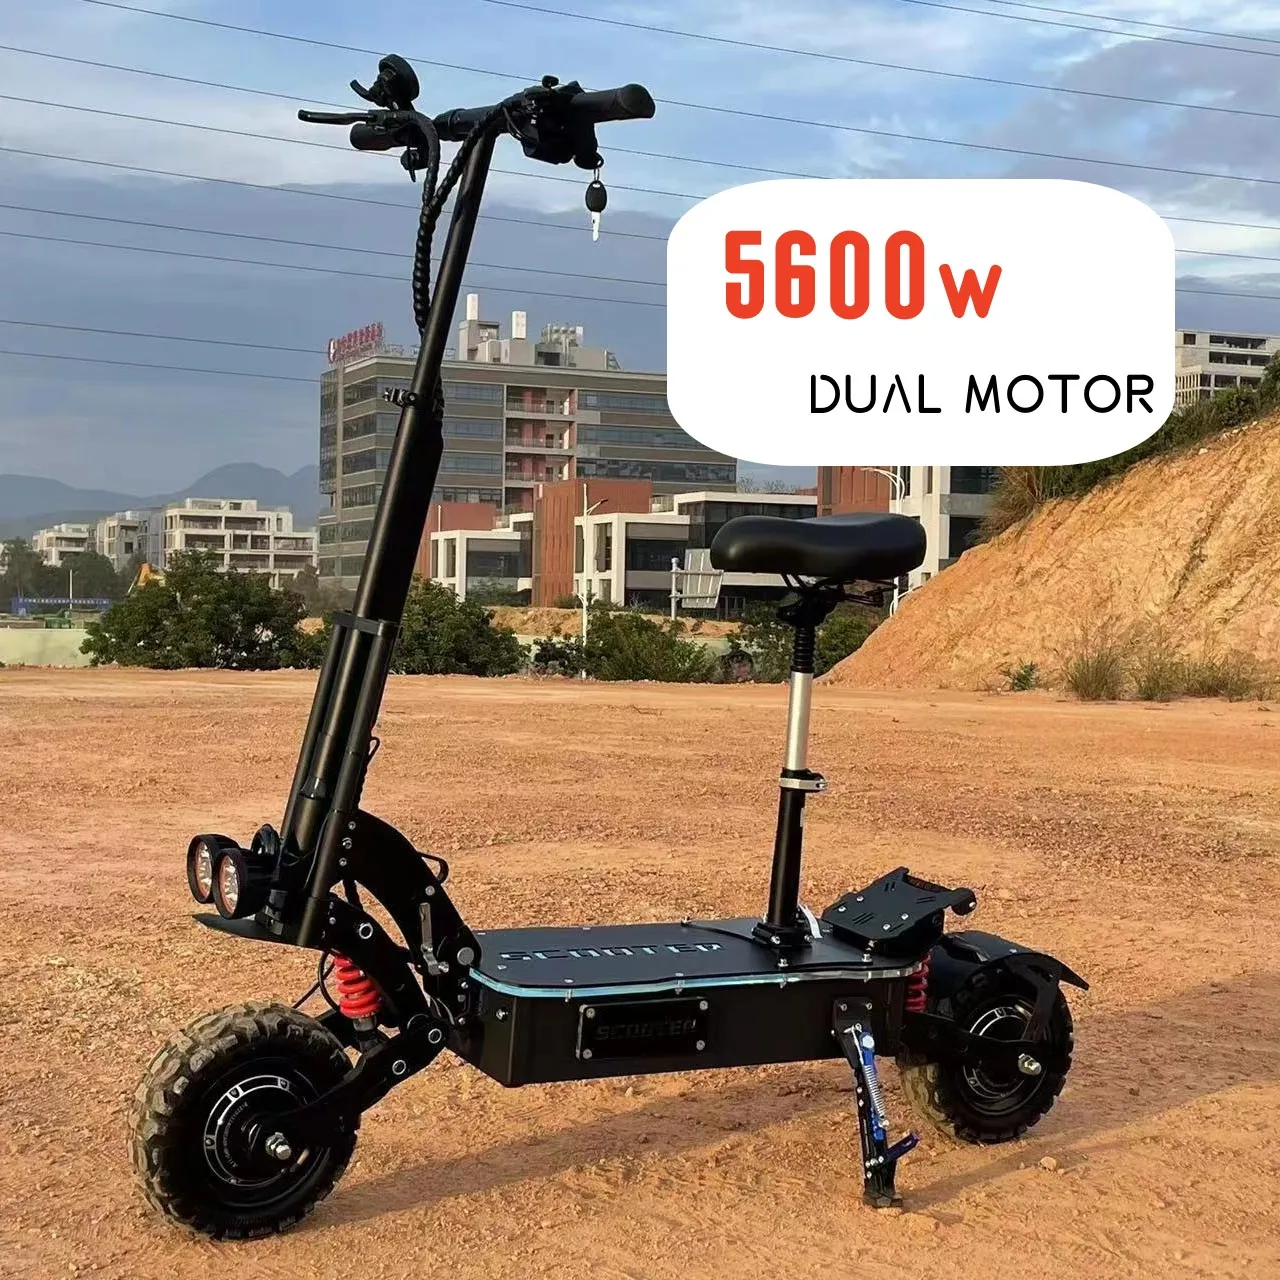 

USA Warehouse MOQ1 dual motor 5600w 60v high speed 70-80km/h 11 inch electric scooter for adults